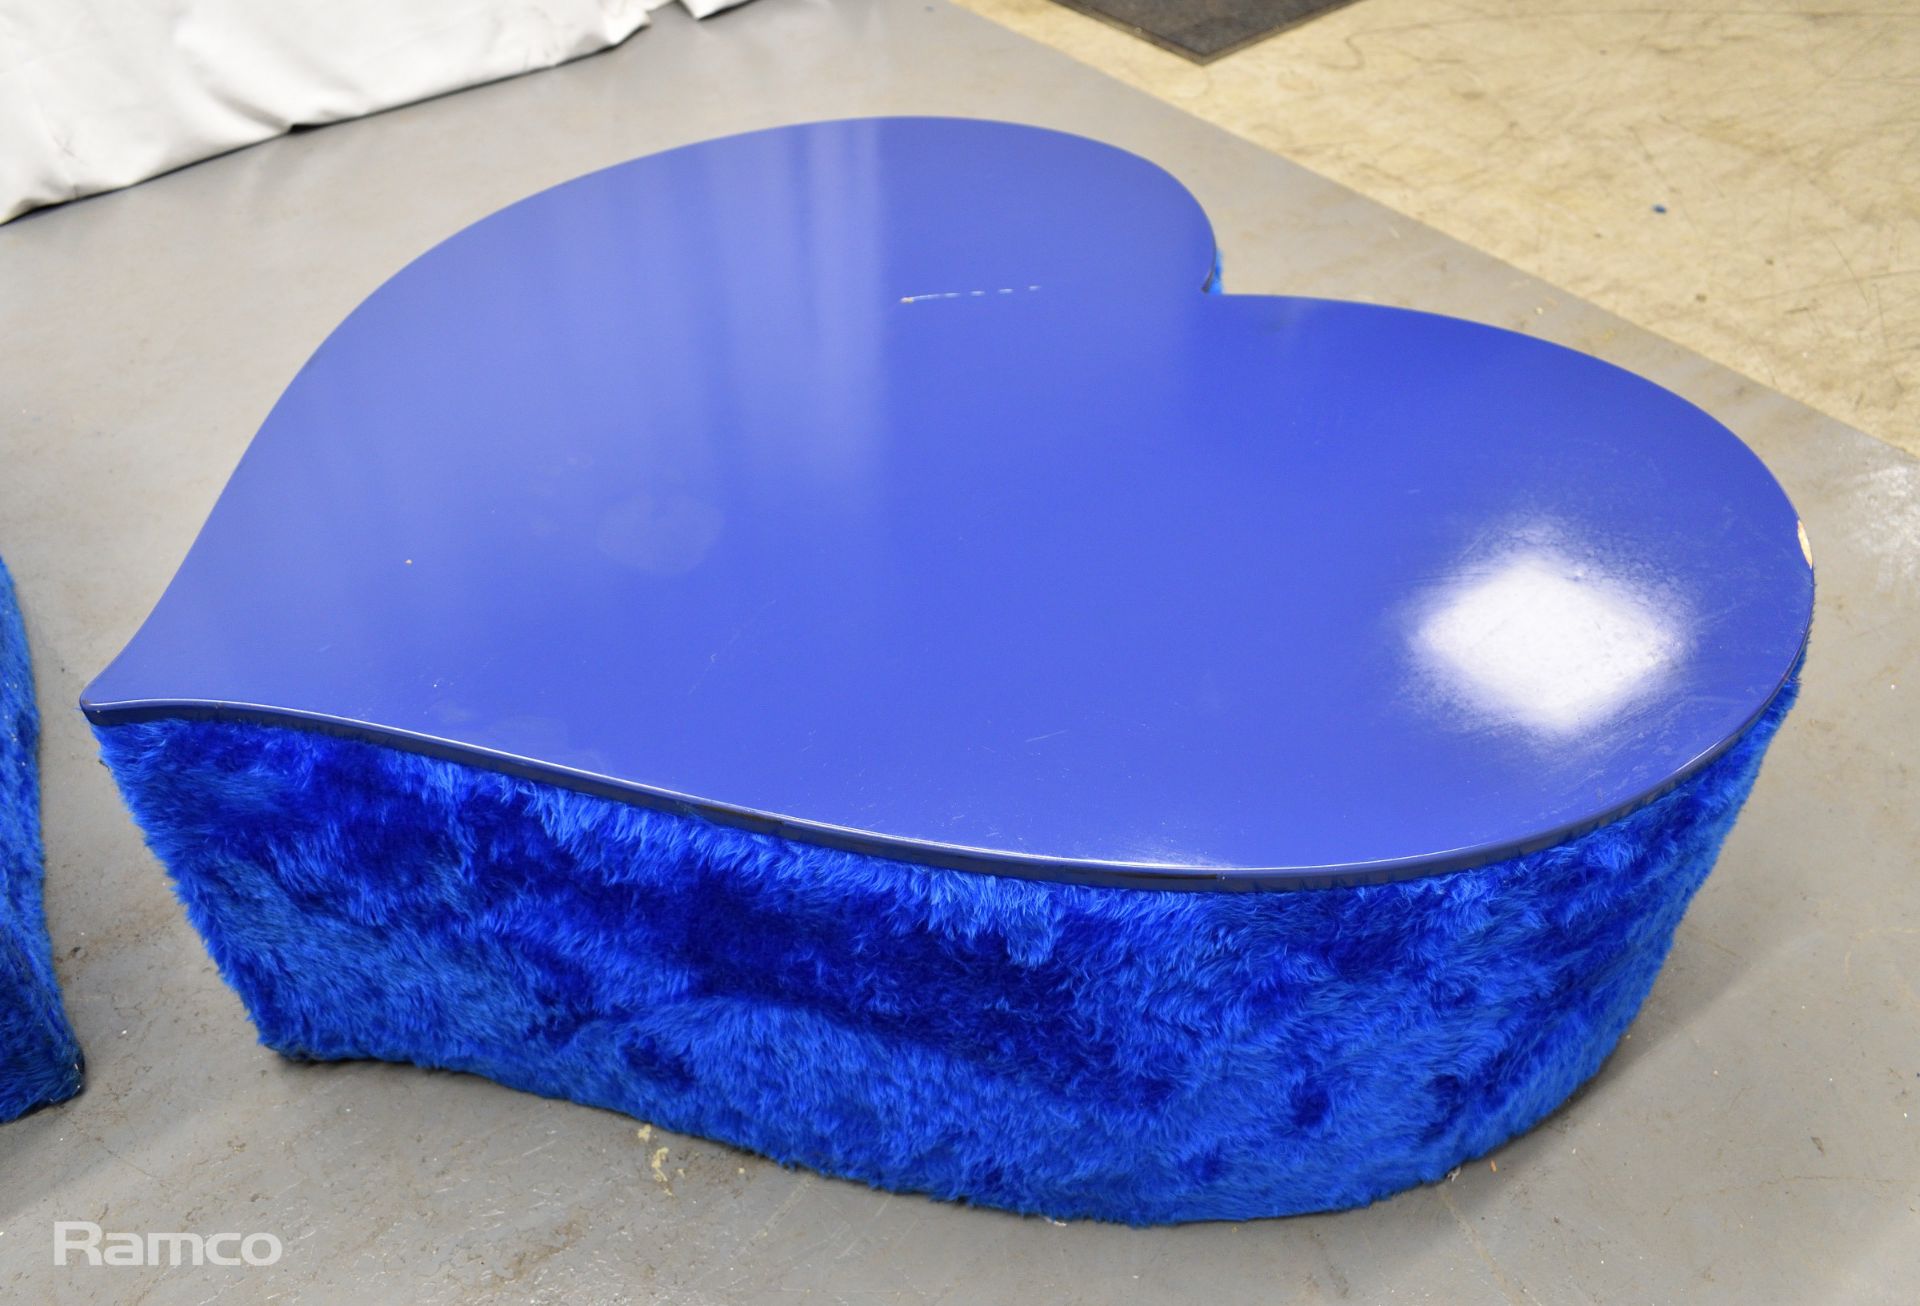 3x Asymmetrical heart shaped blue fur-covered wooden tables from countries' seating area - Image 4 of 14